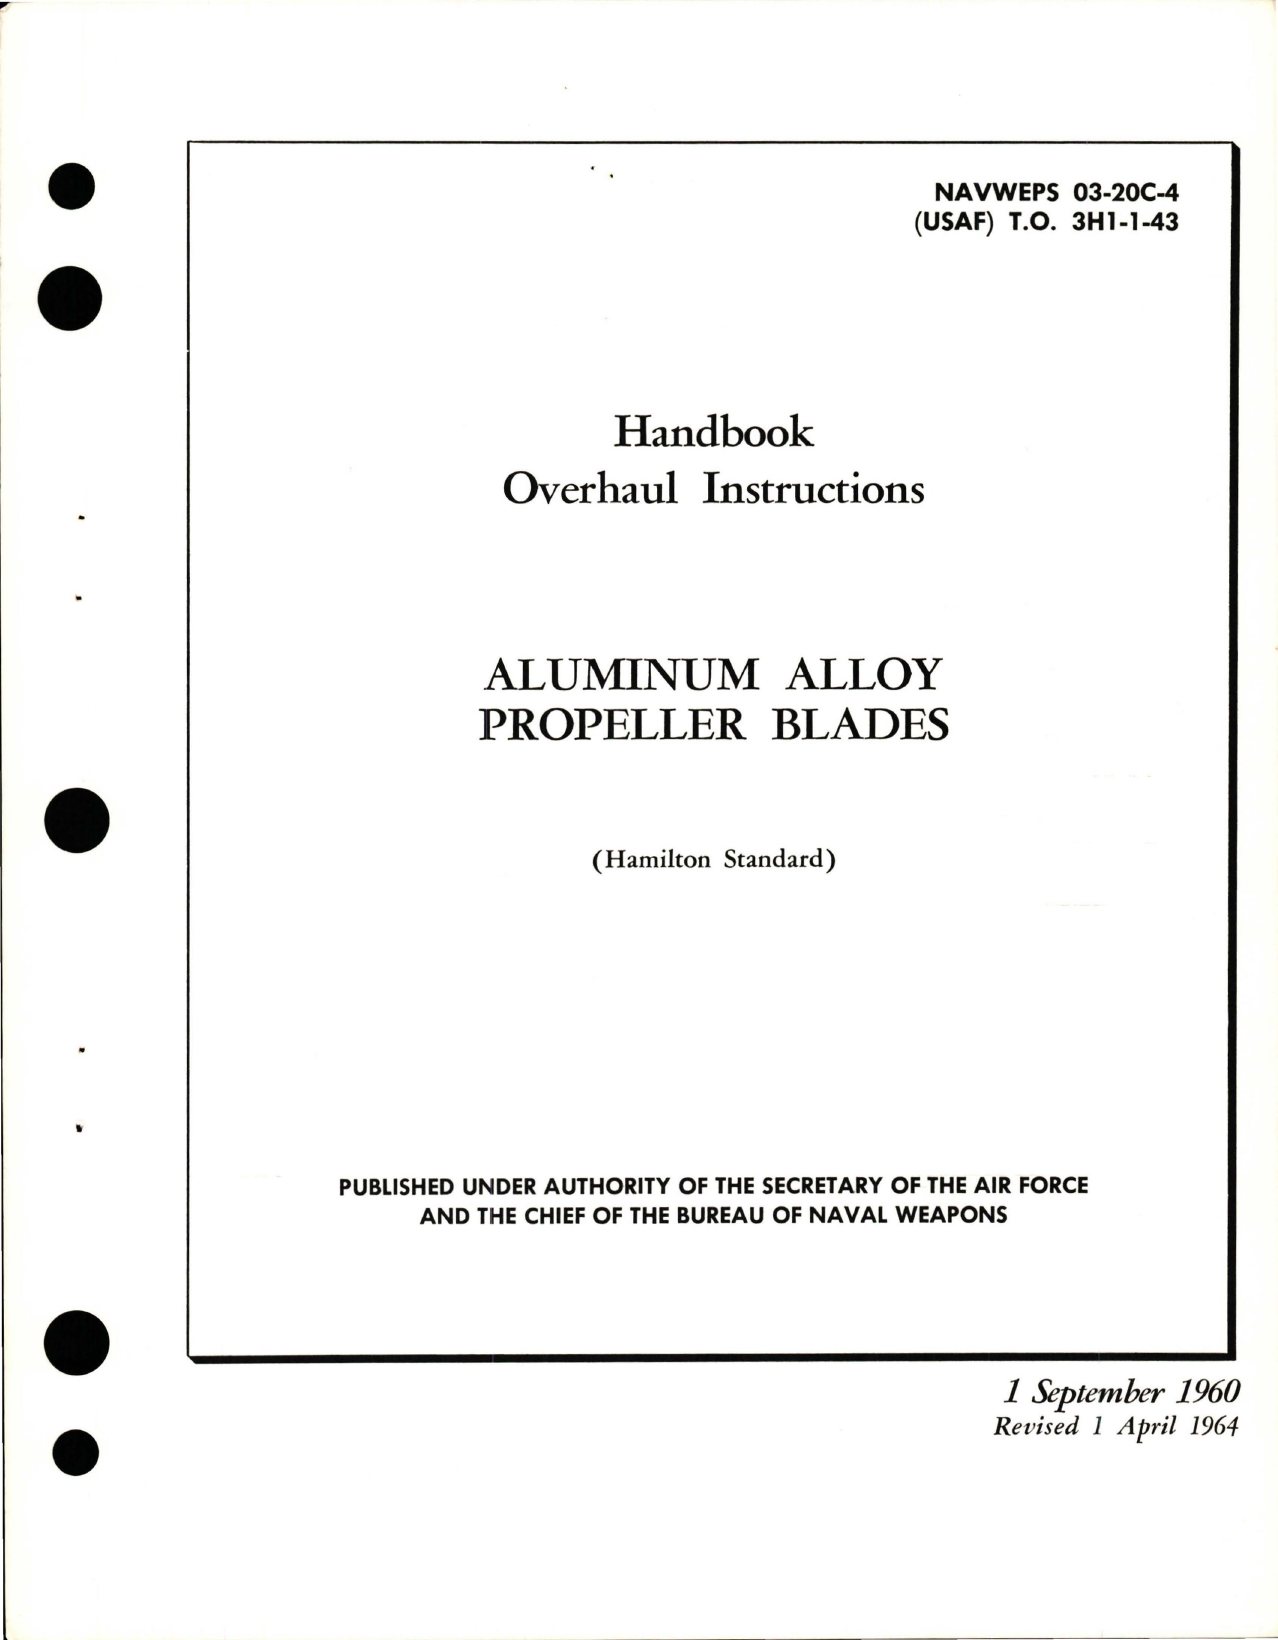 Sample page 1 from AirCorps Library document: Overhaul Instructions for Aluminum Alloy Propeller Blades